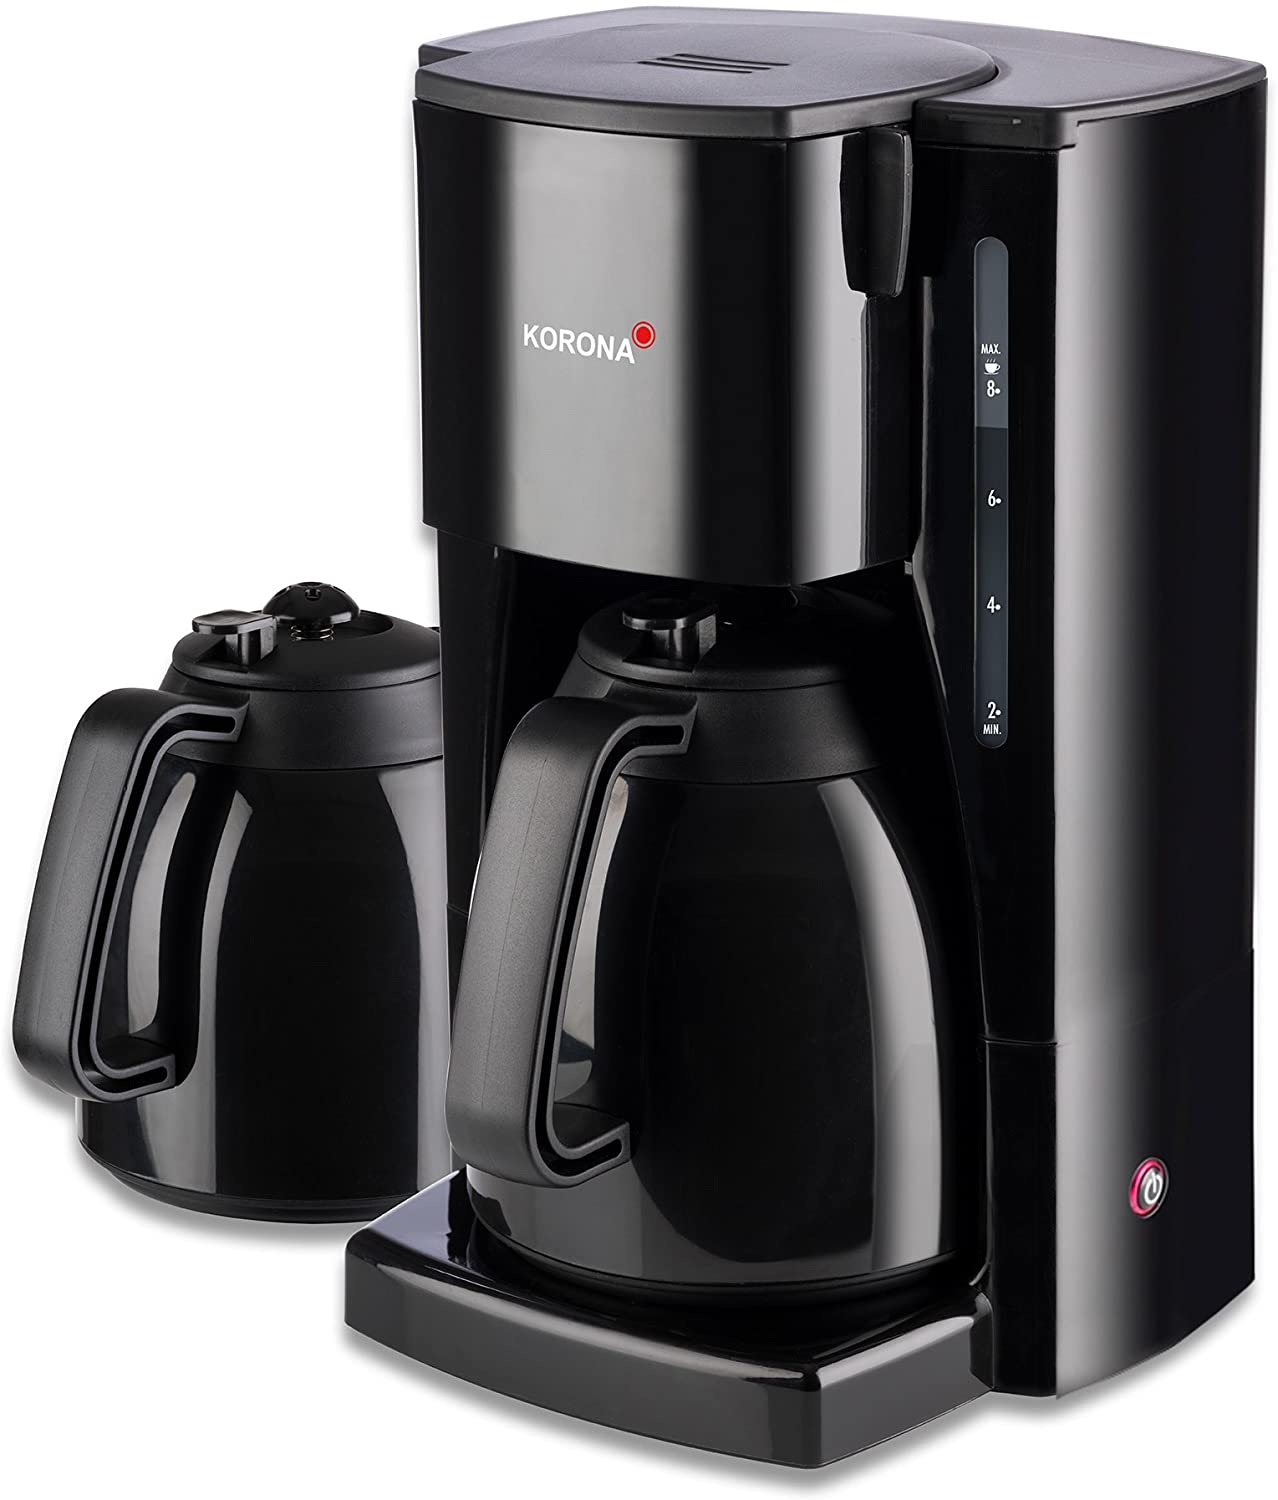 Korona 10311 Coffee Machine with Additional Thermal Jug - Filter Coffee Machine with Capacity for 8 Cups of Coffee